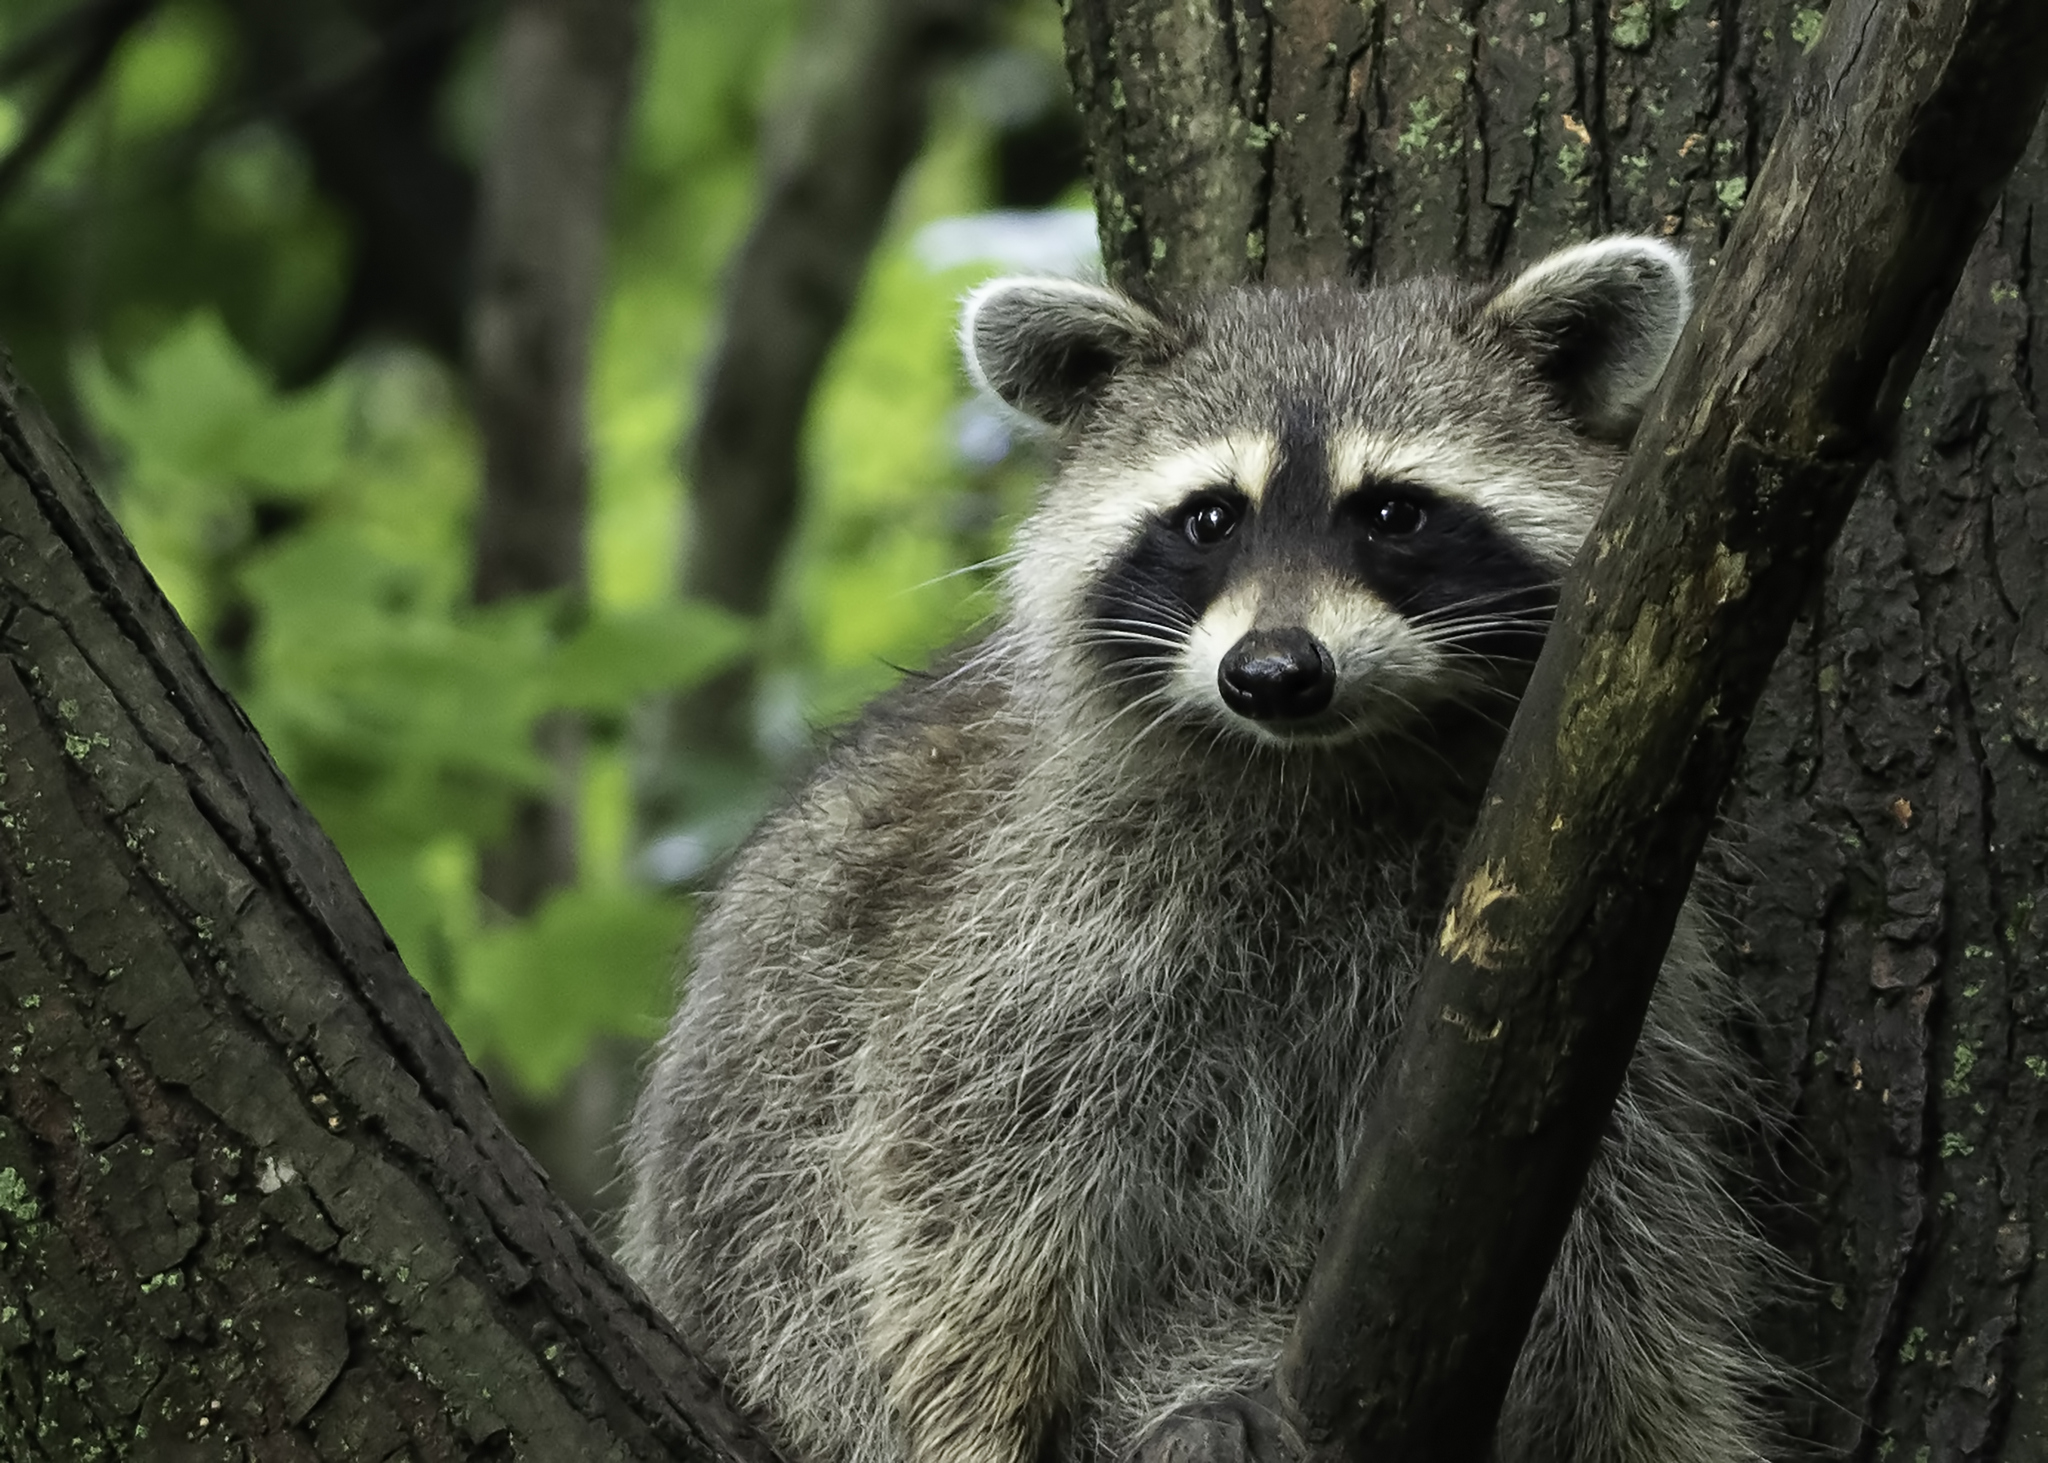 Raccoons Are Omnivores.